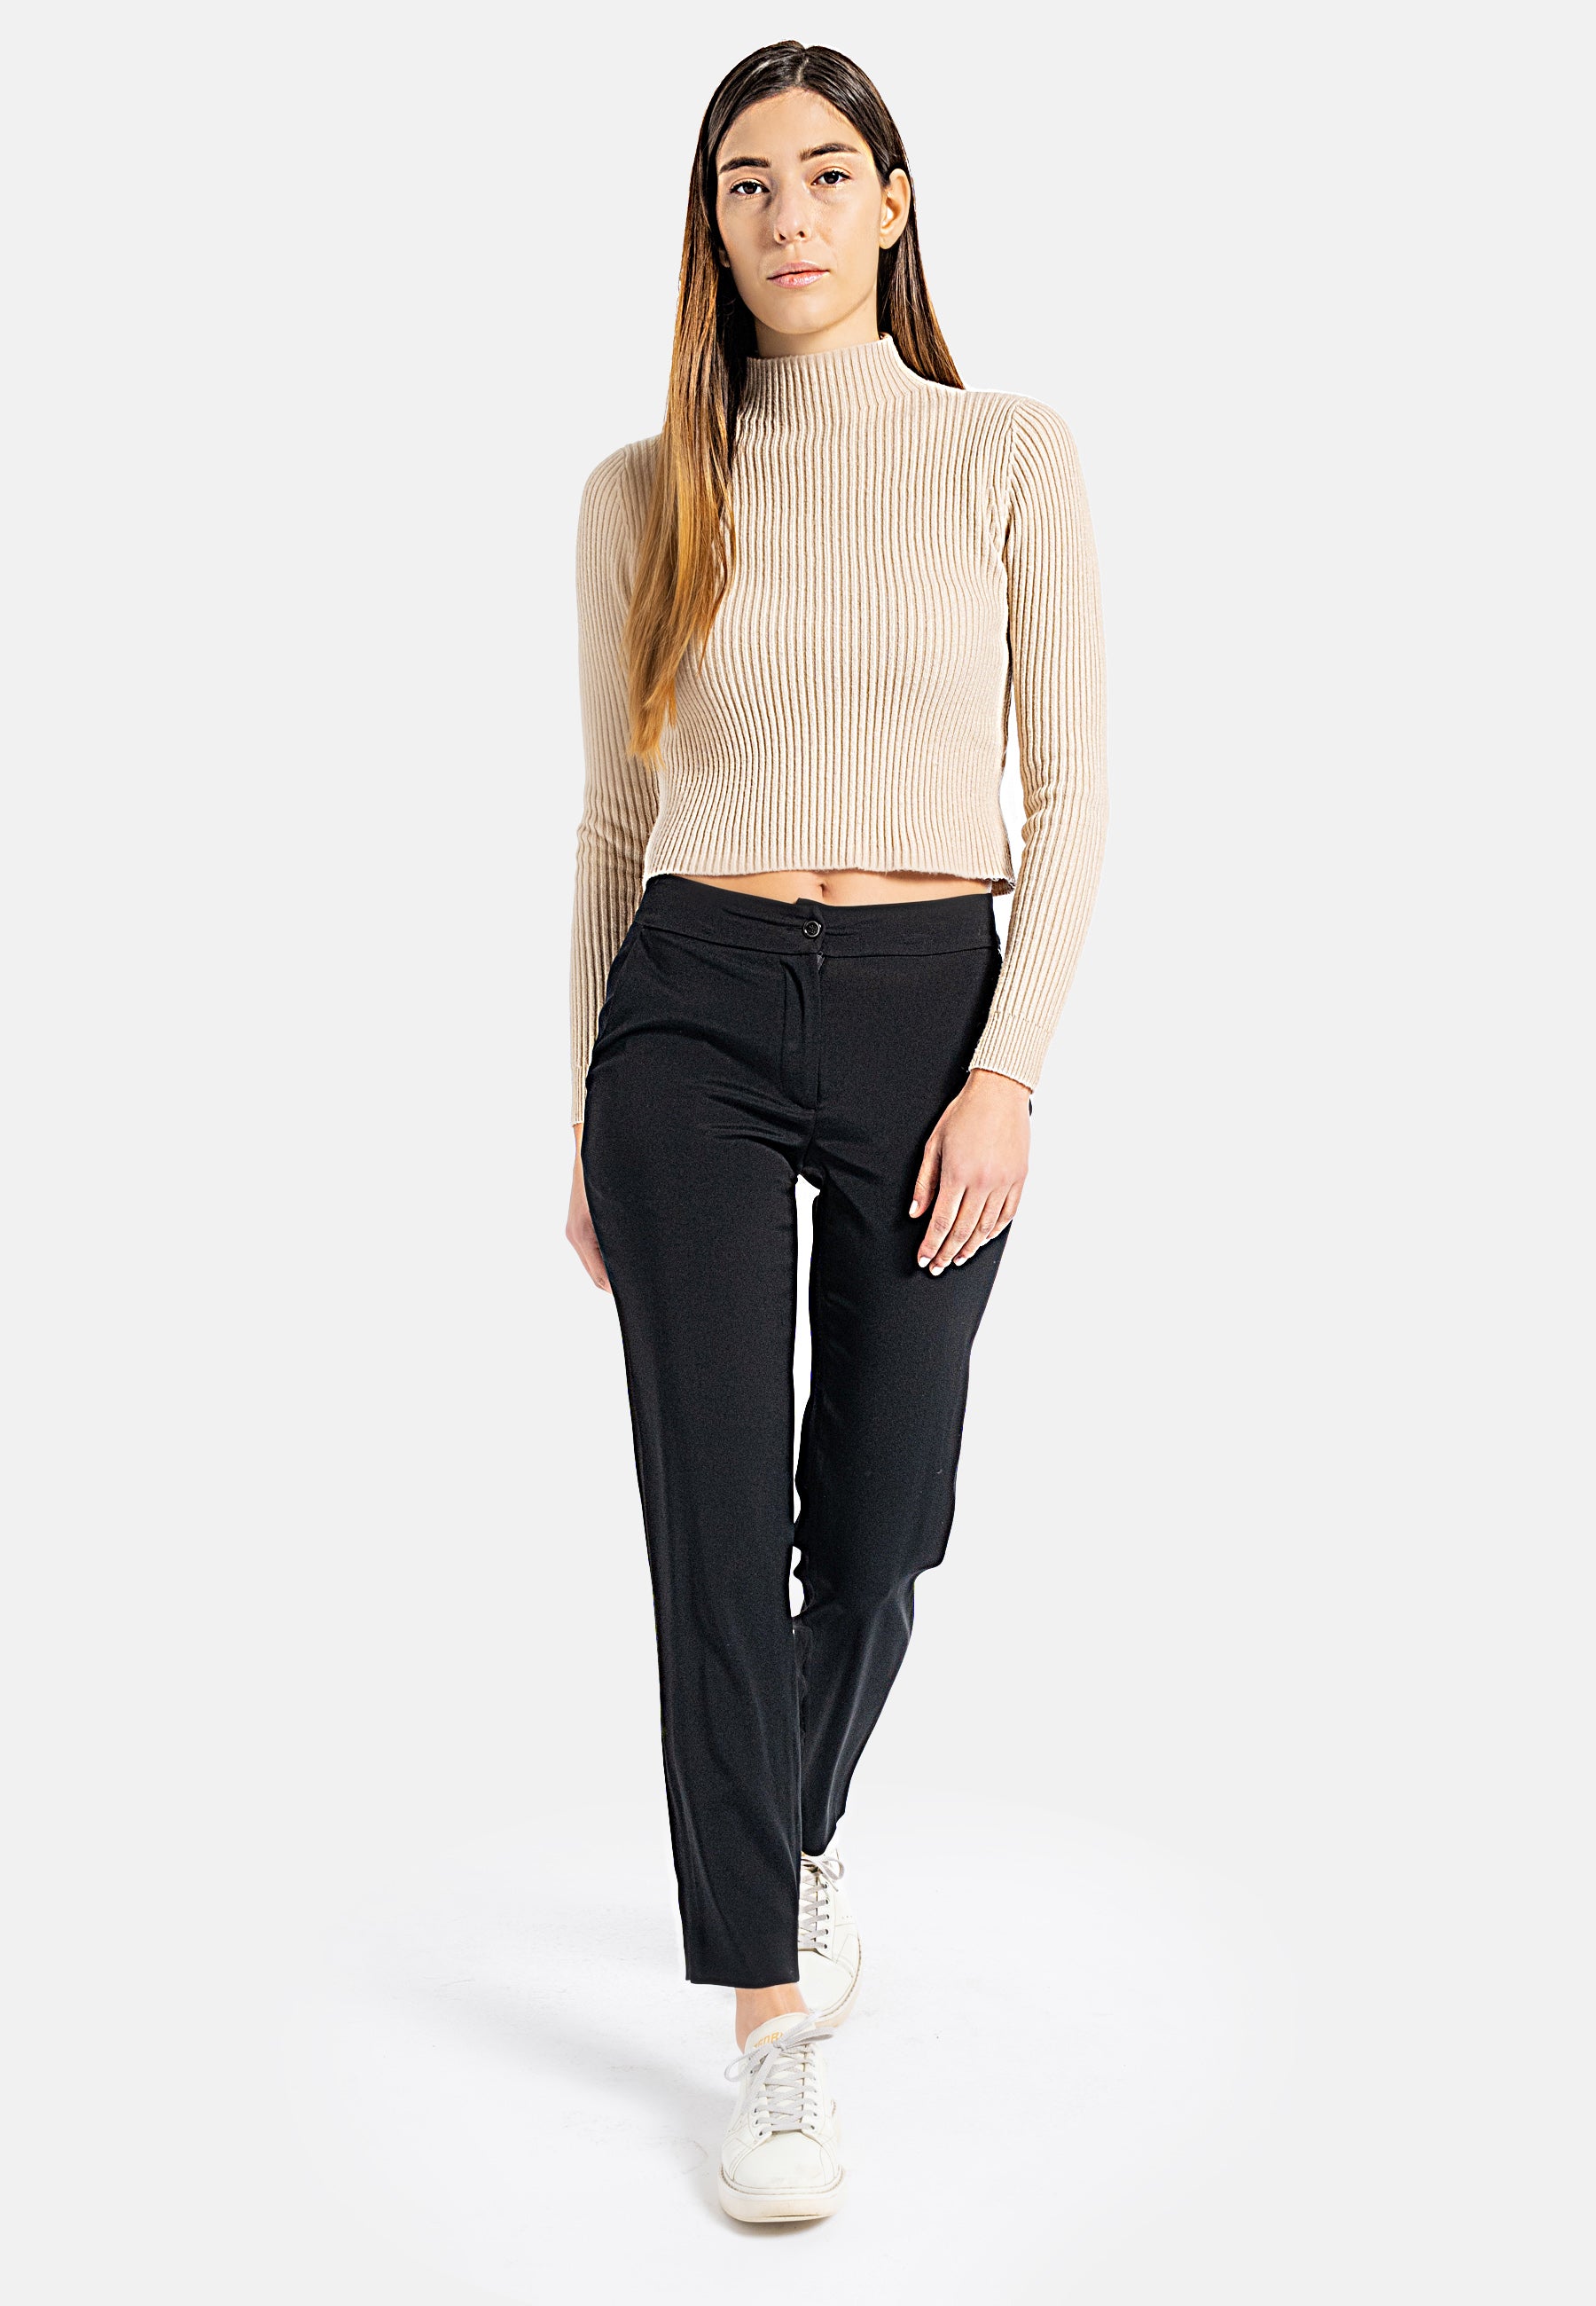 Darwin ankle-length trousers with side pockets, Ethical Clothing